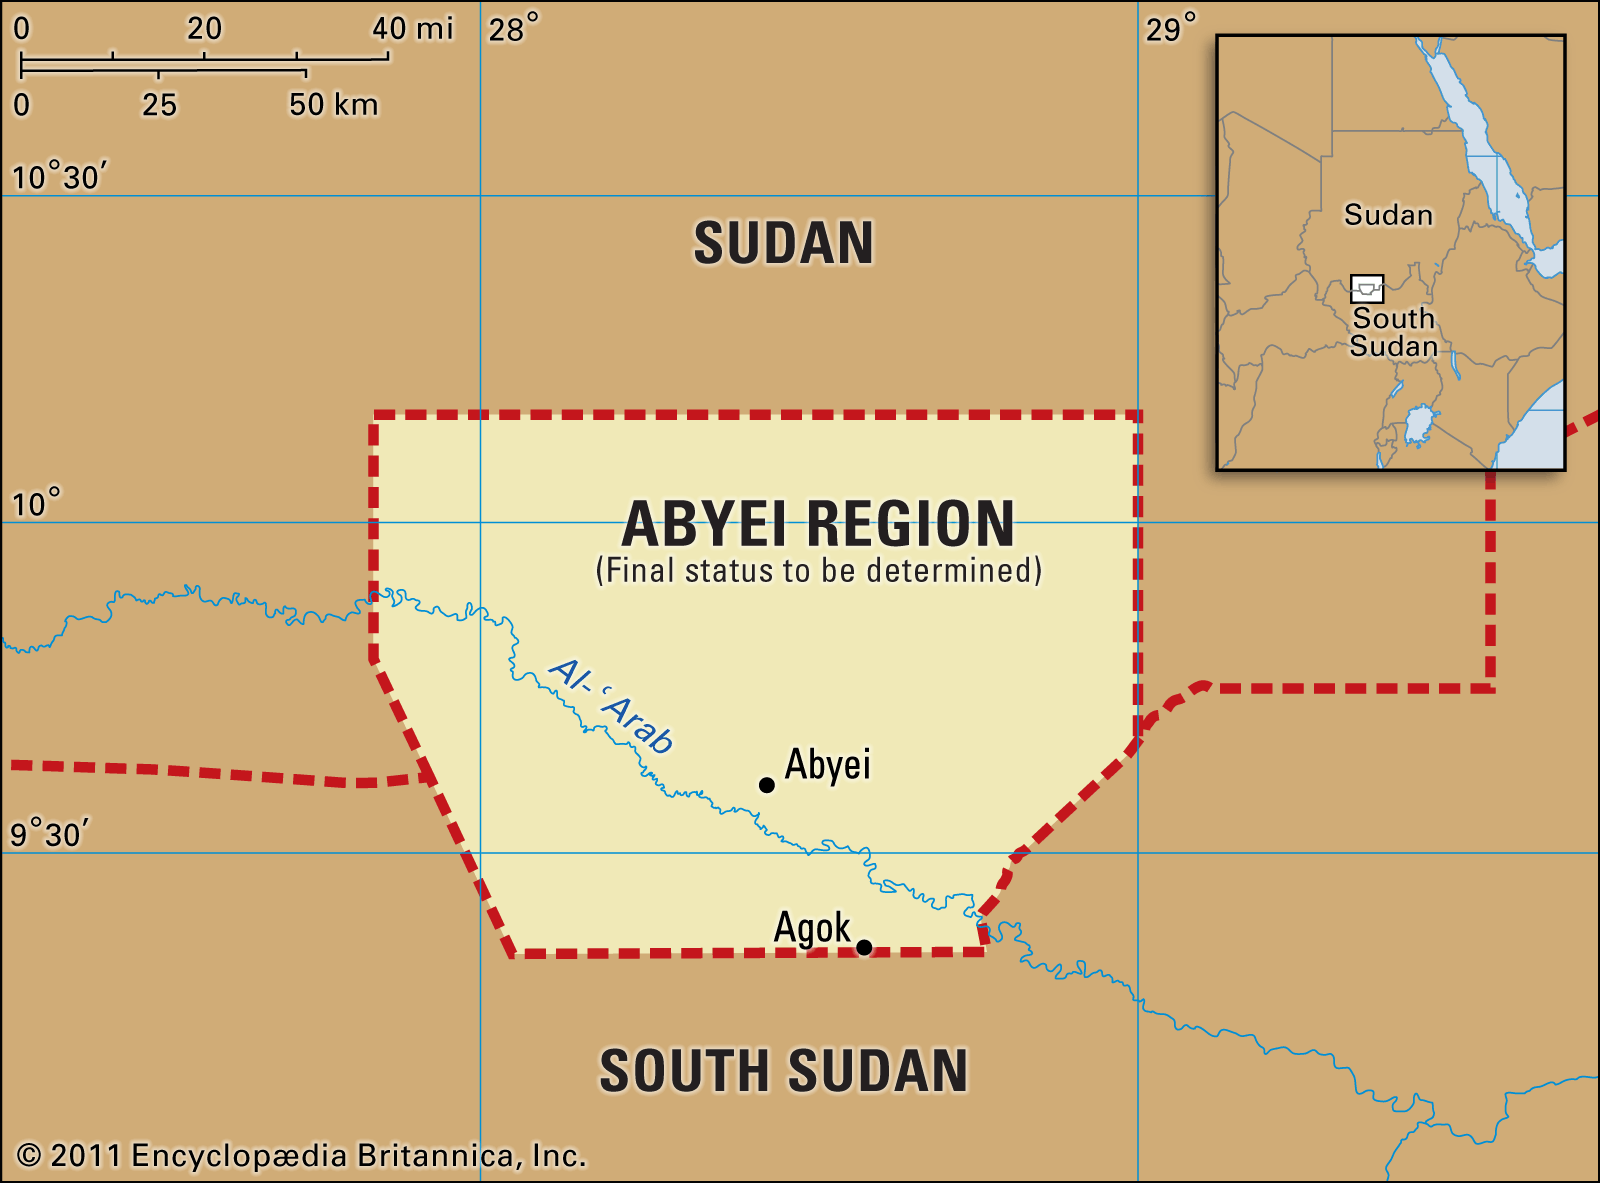 Gov’t to send border committee to Sudan over Abyei conflicts